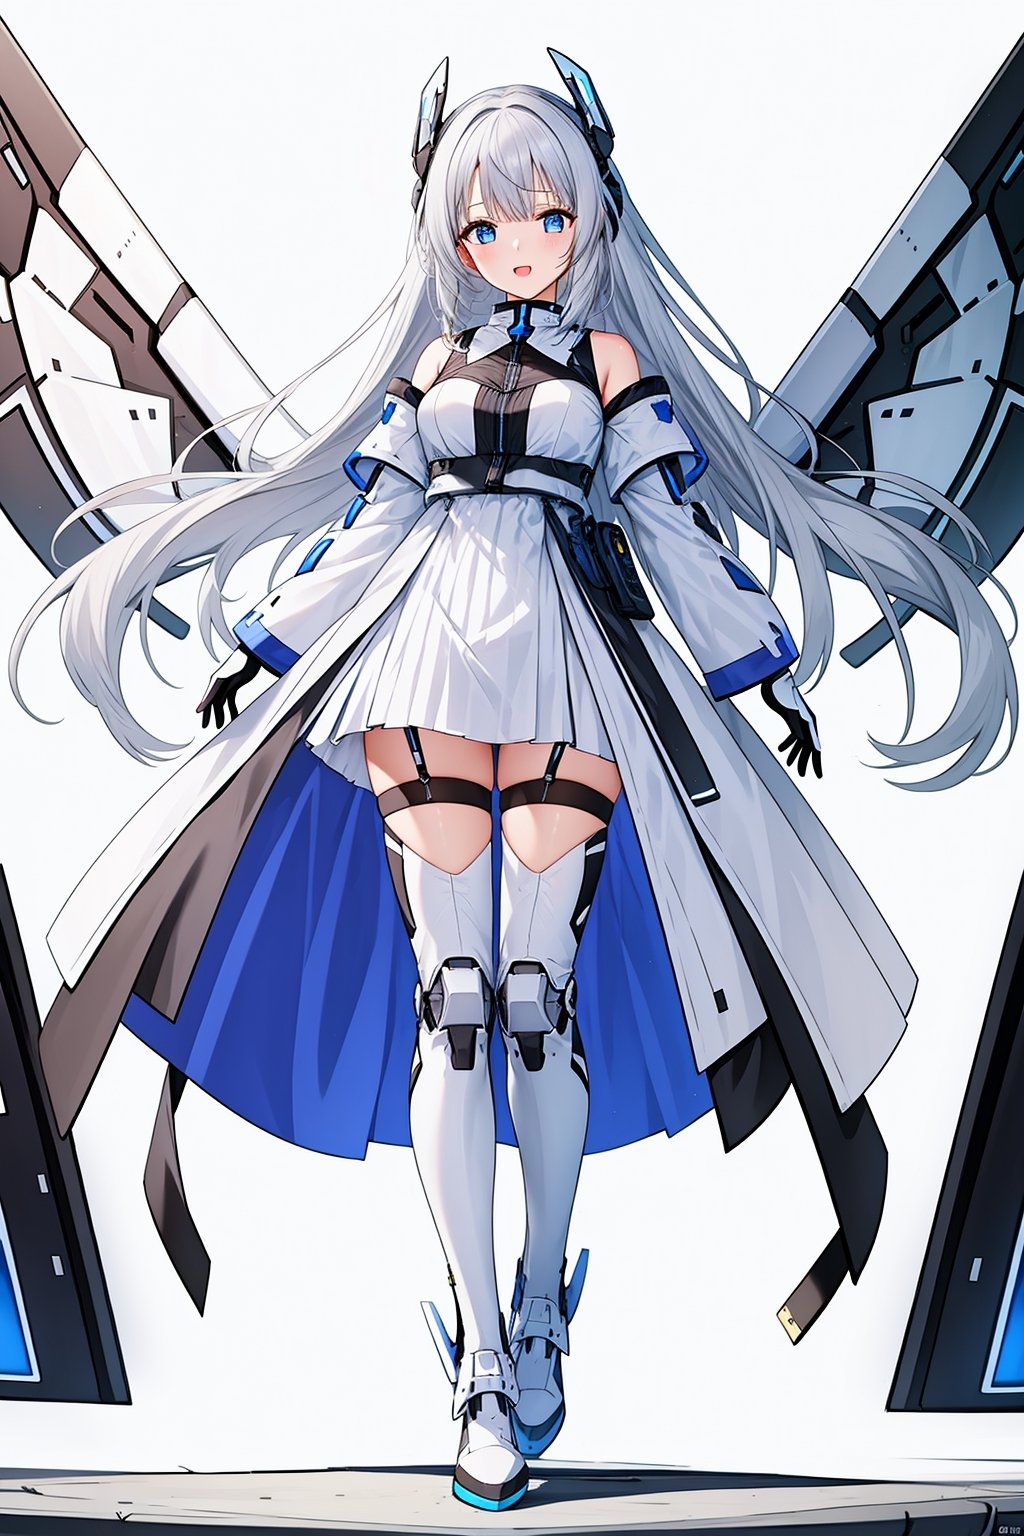 1 girl, solo, white Mecha pants, wings, blue eyes, long hair, white shoes, hair accessories, looking at the audience, gray hair, hair accessories, bangs, gray eyes, staff, clean background, mechanical wings, video card fan, gloves, white, simple background, cute, video card promo character, console, keyboard, mouse, handle<lora:天启姬:0.7>,